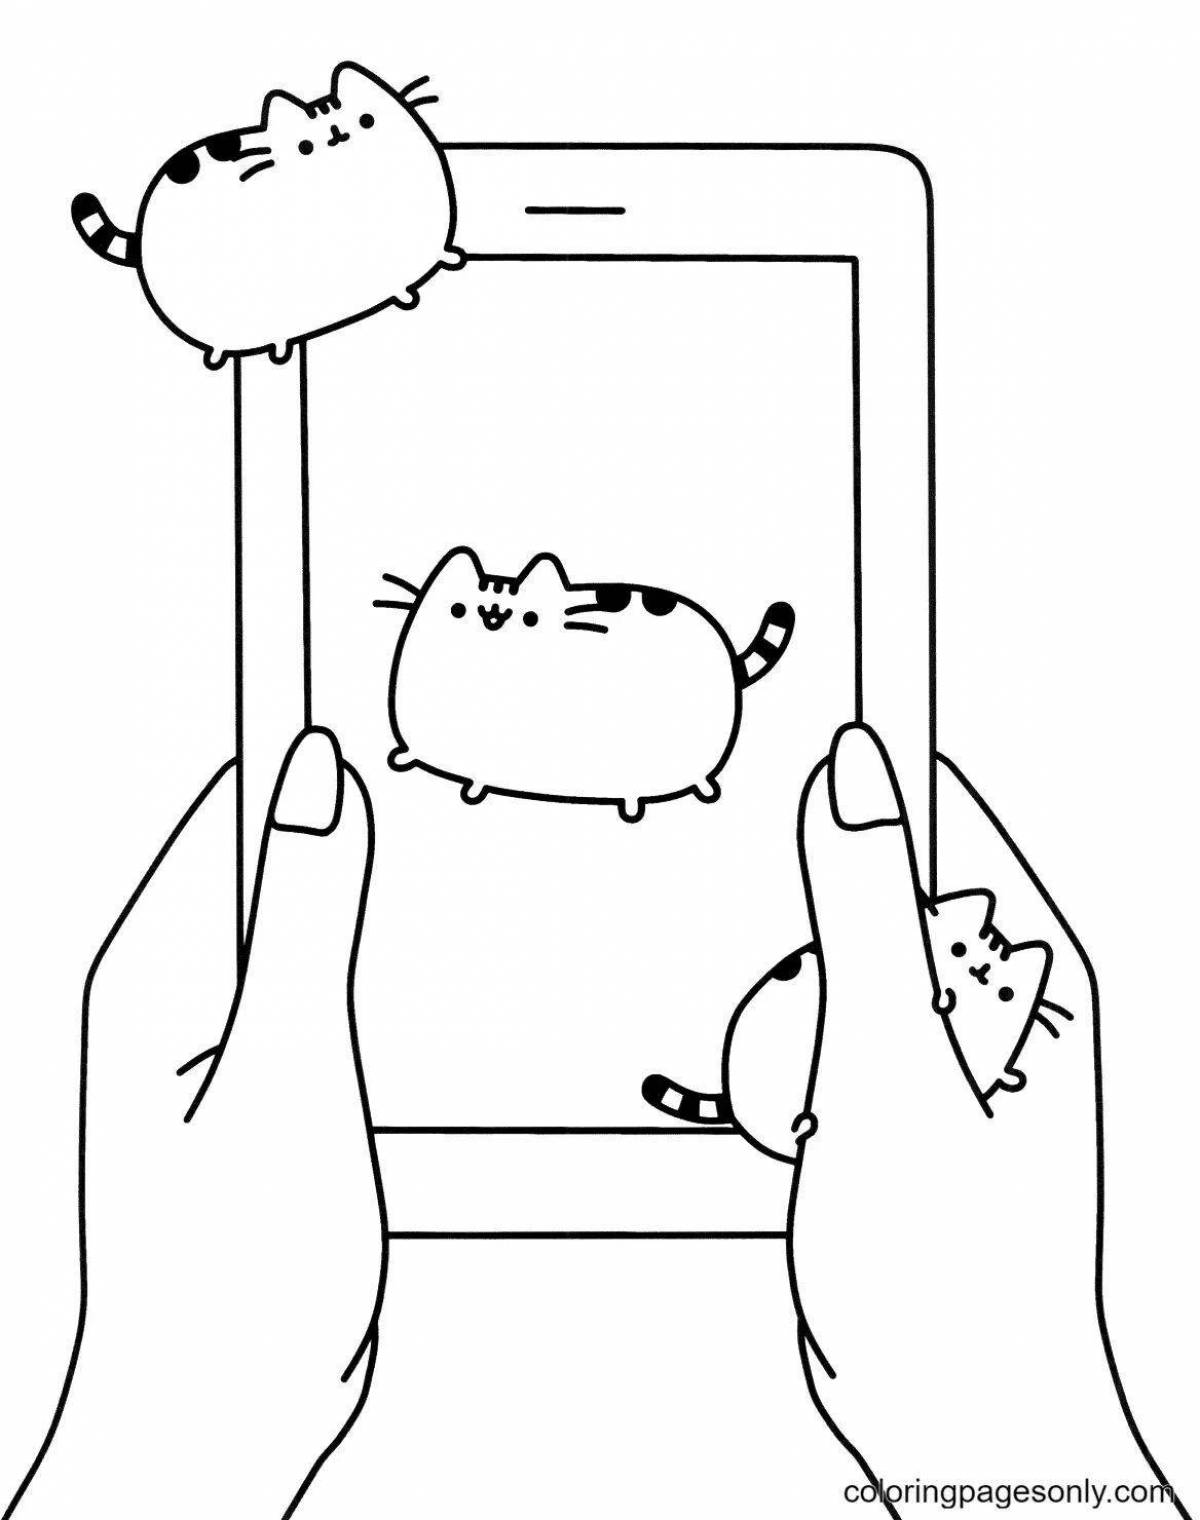 Vibrant pusheen coloring page